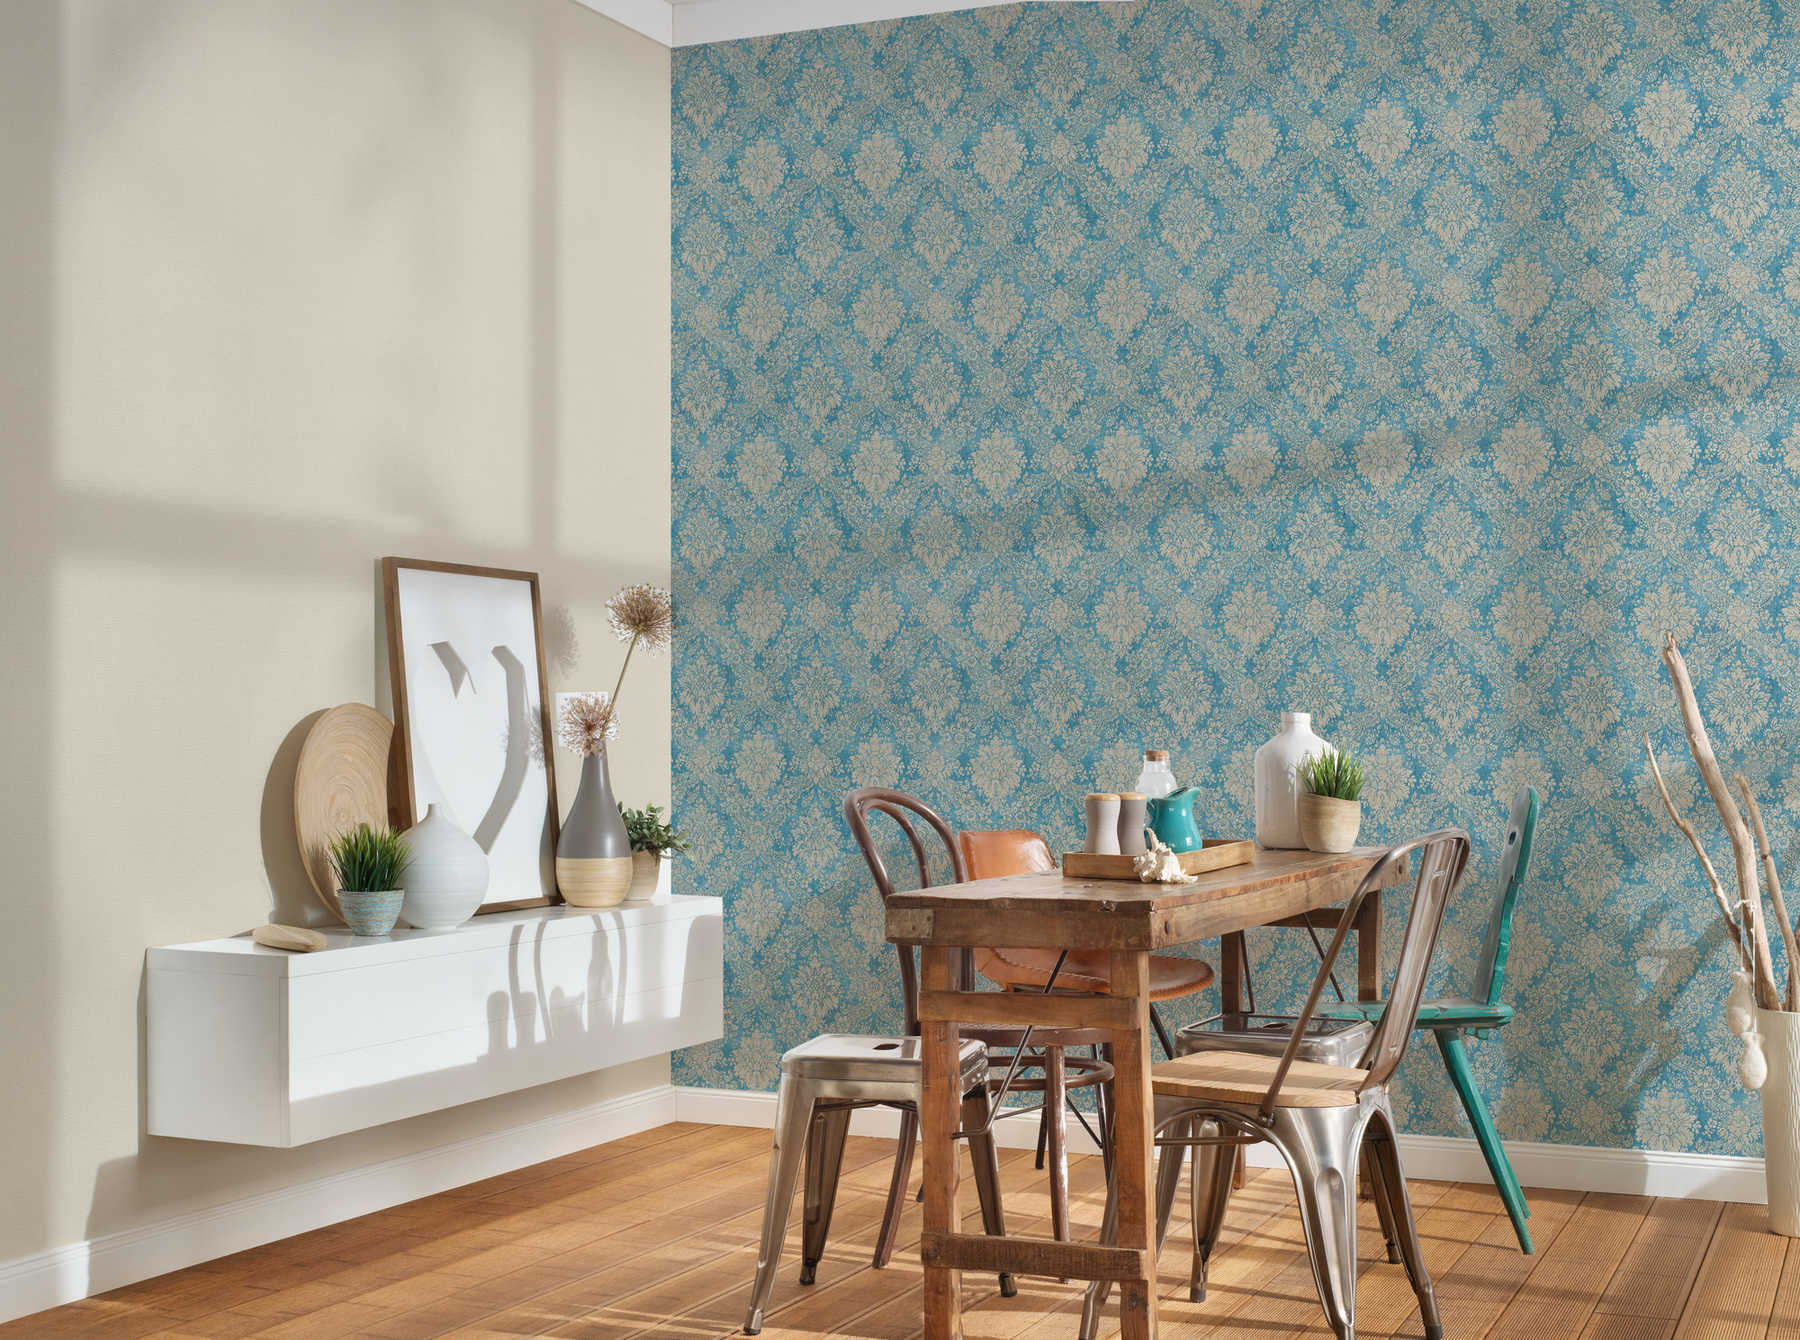             Floral ornament wallpaper with metallic effect & used look - blue, brown, metallic
        